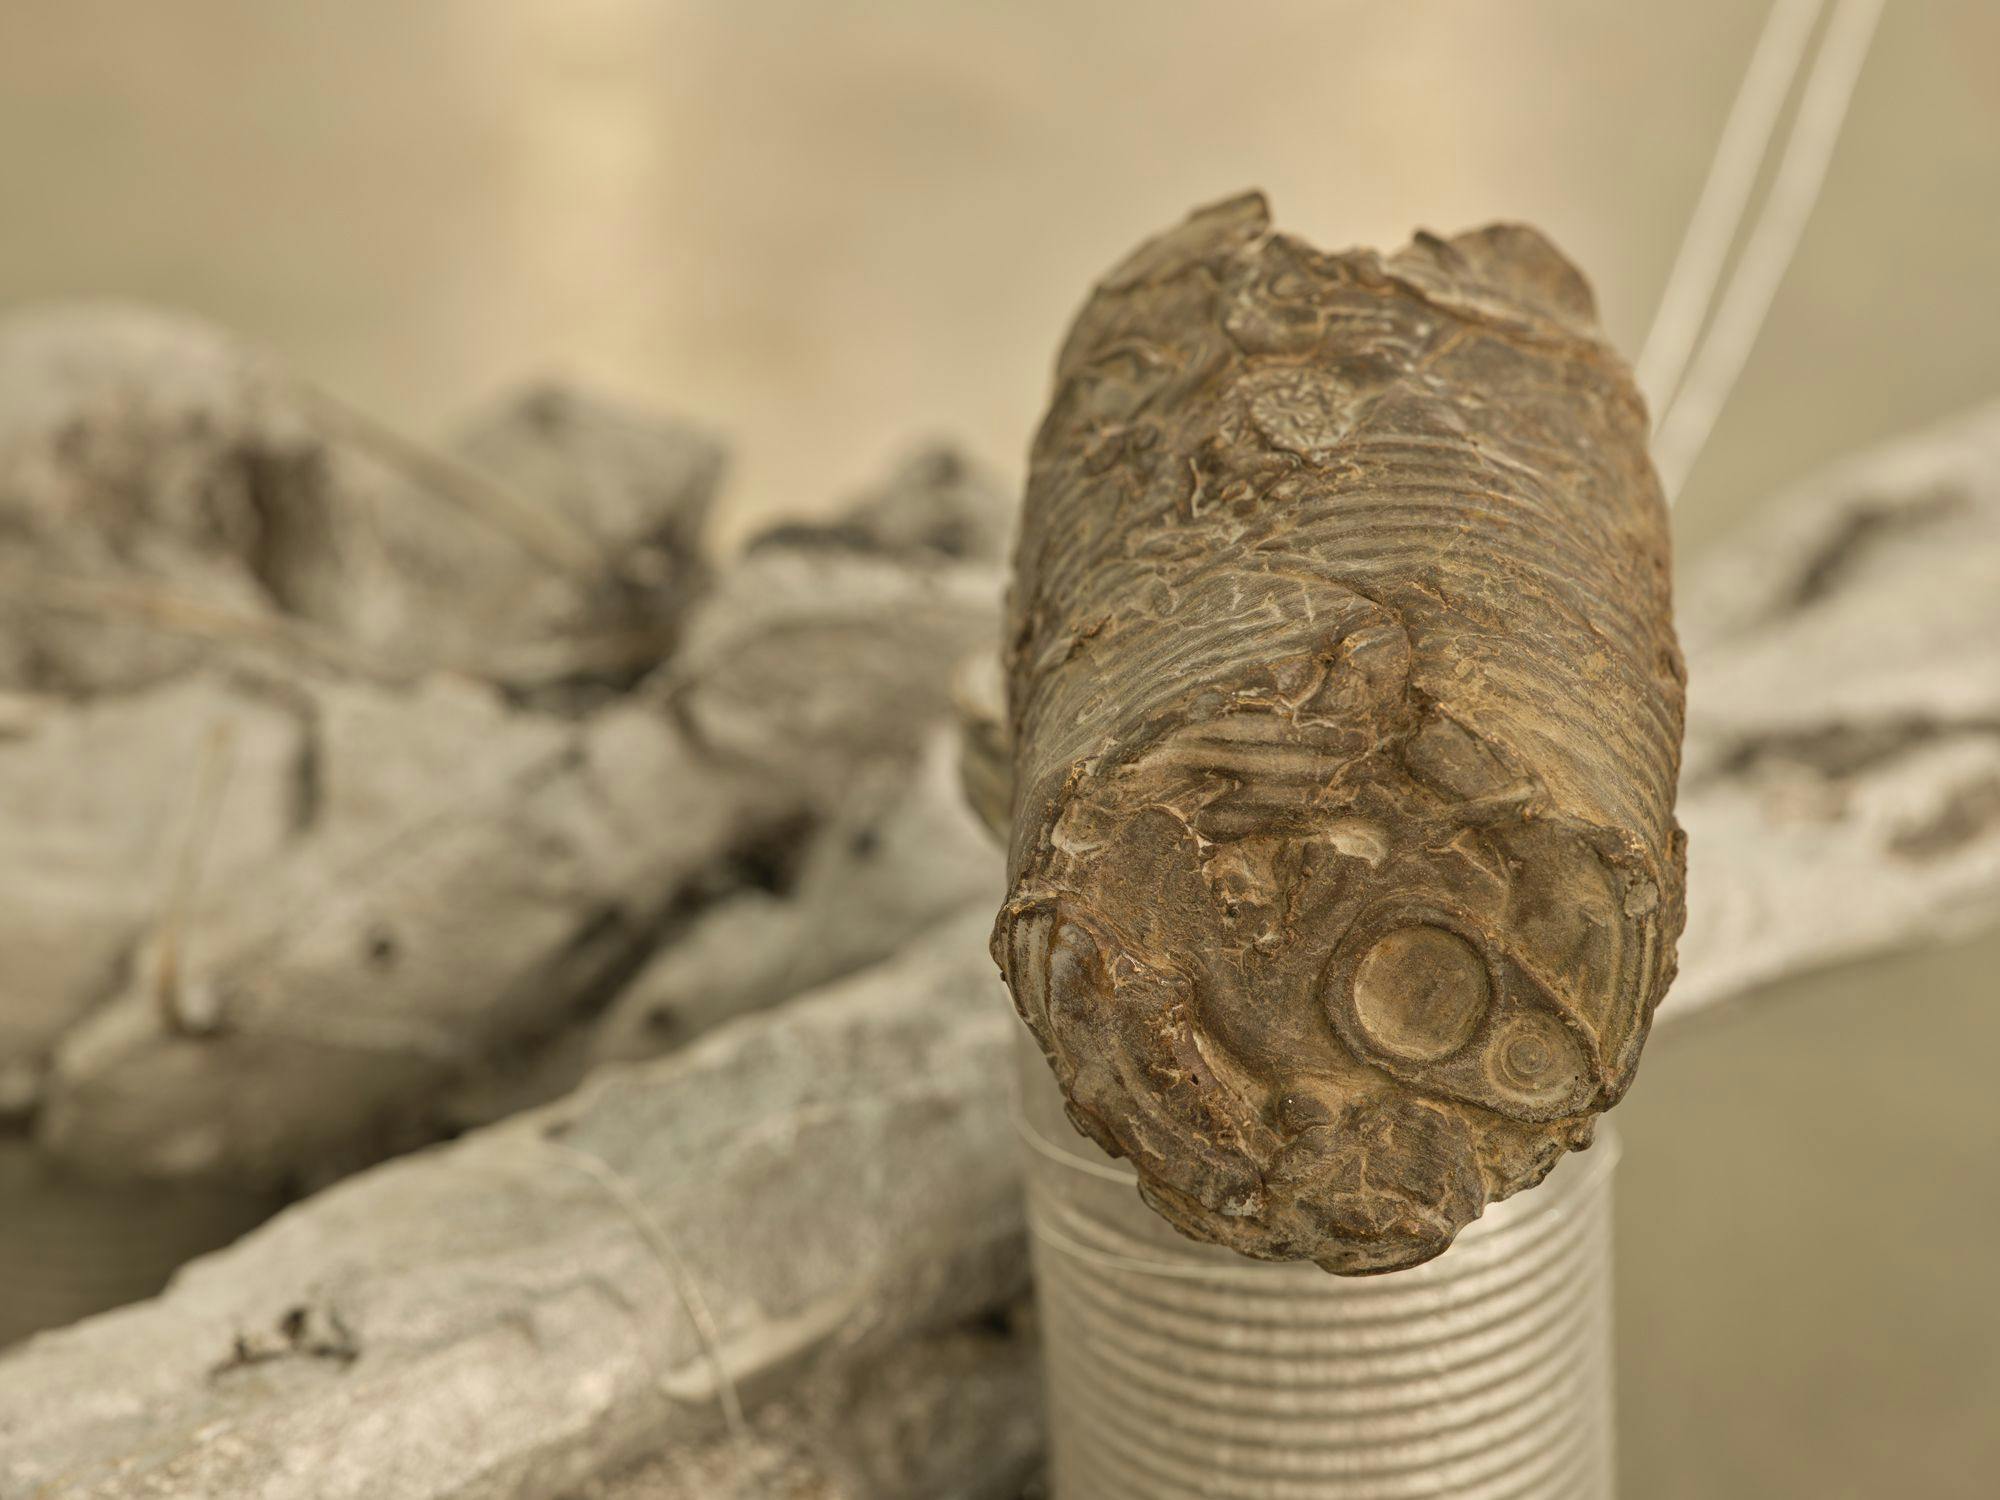 A detail of a sculpture comprised of silver-painted baguettes, wire, aluminum cans and a bronze can. The bronze can is in focus and its background is blurred.